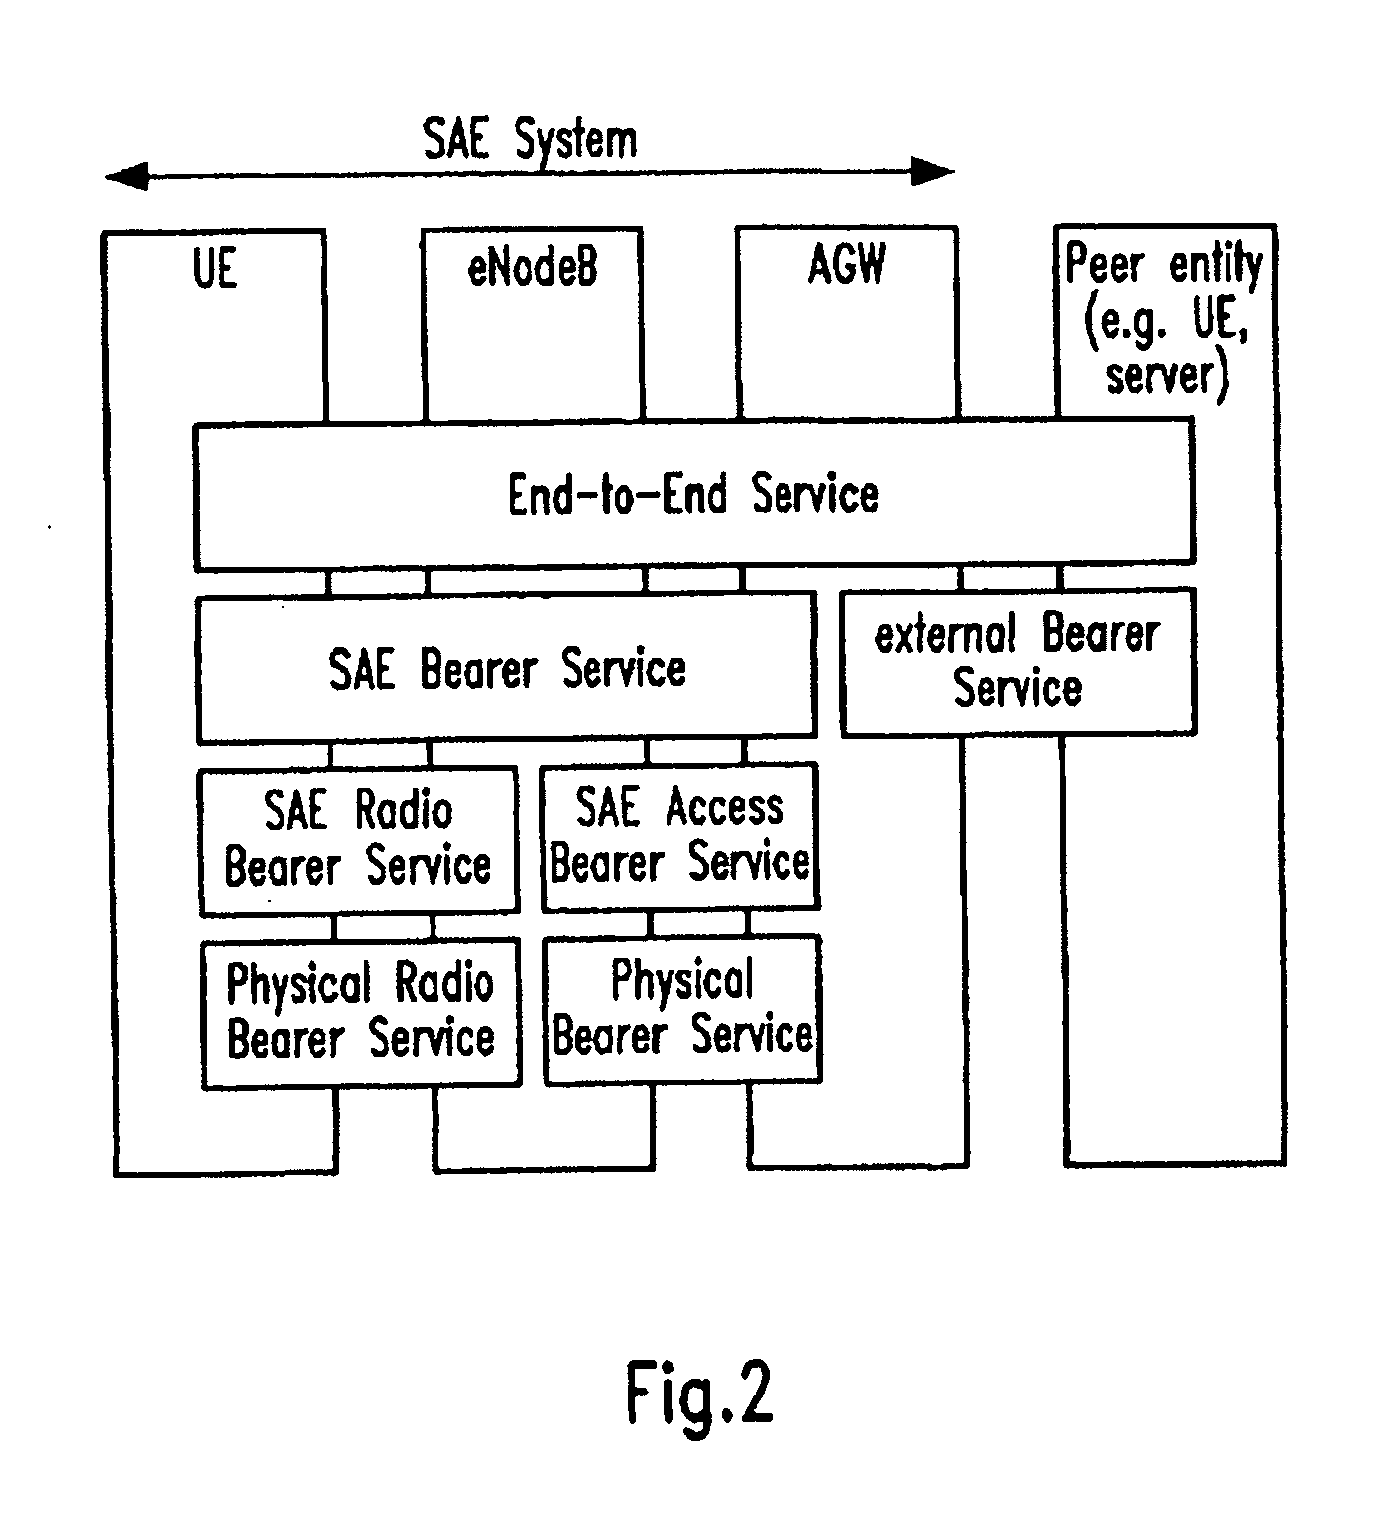 Method for supporting quality of service over a connection lifetime